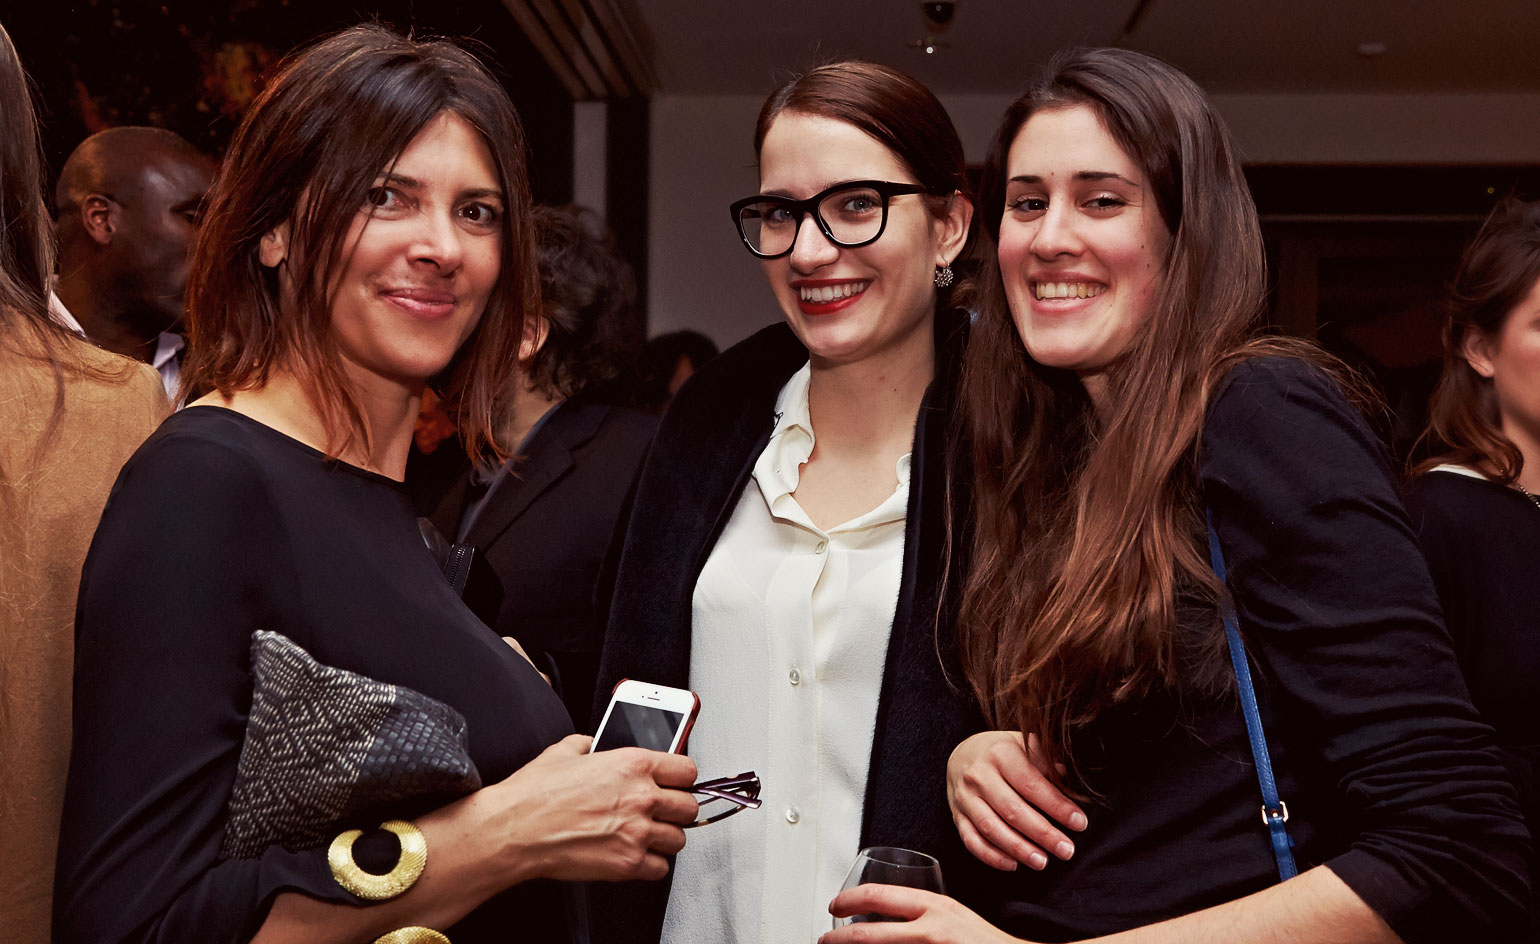 THE 2015 DESIGN AWARDS PARTY IN LONDON